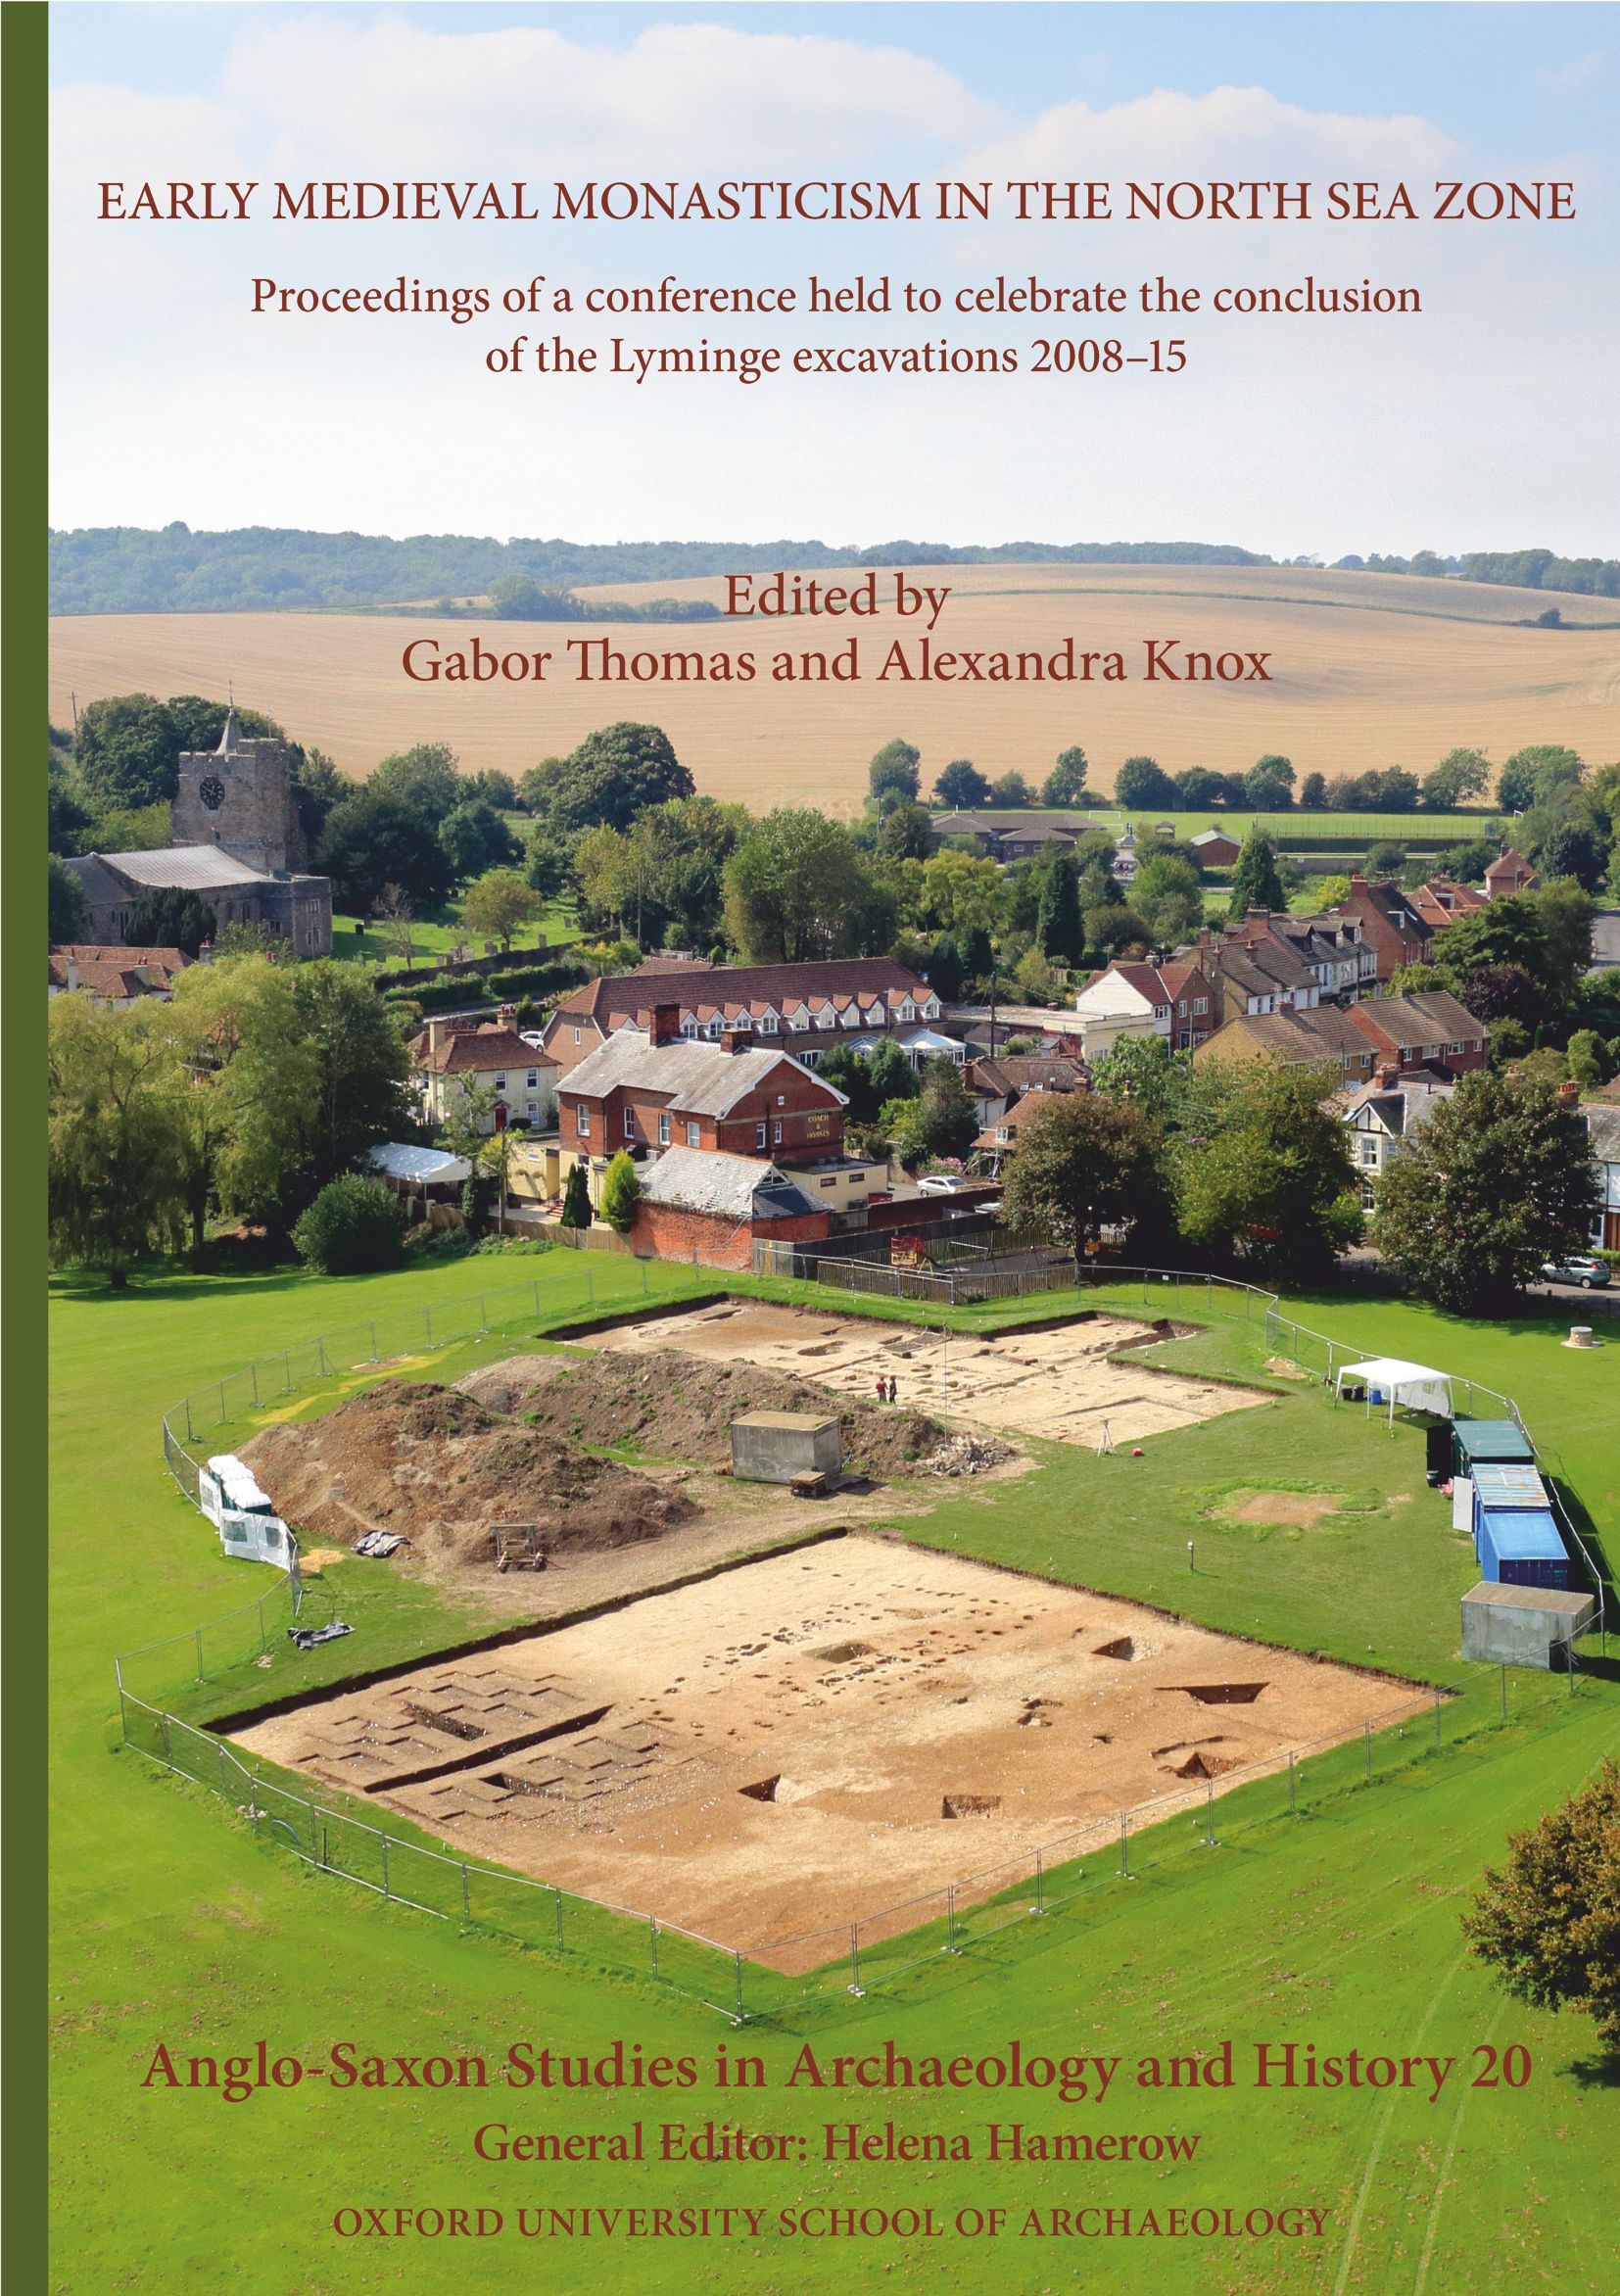 Anglo-Saxon Studies in Archaeology and History 20: Early Medieval Monasticism in the North Sea Zone: Recent Research and New Perspectives